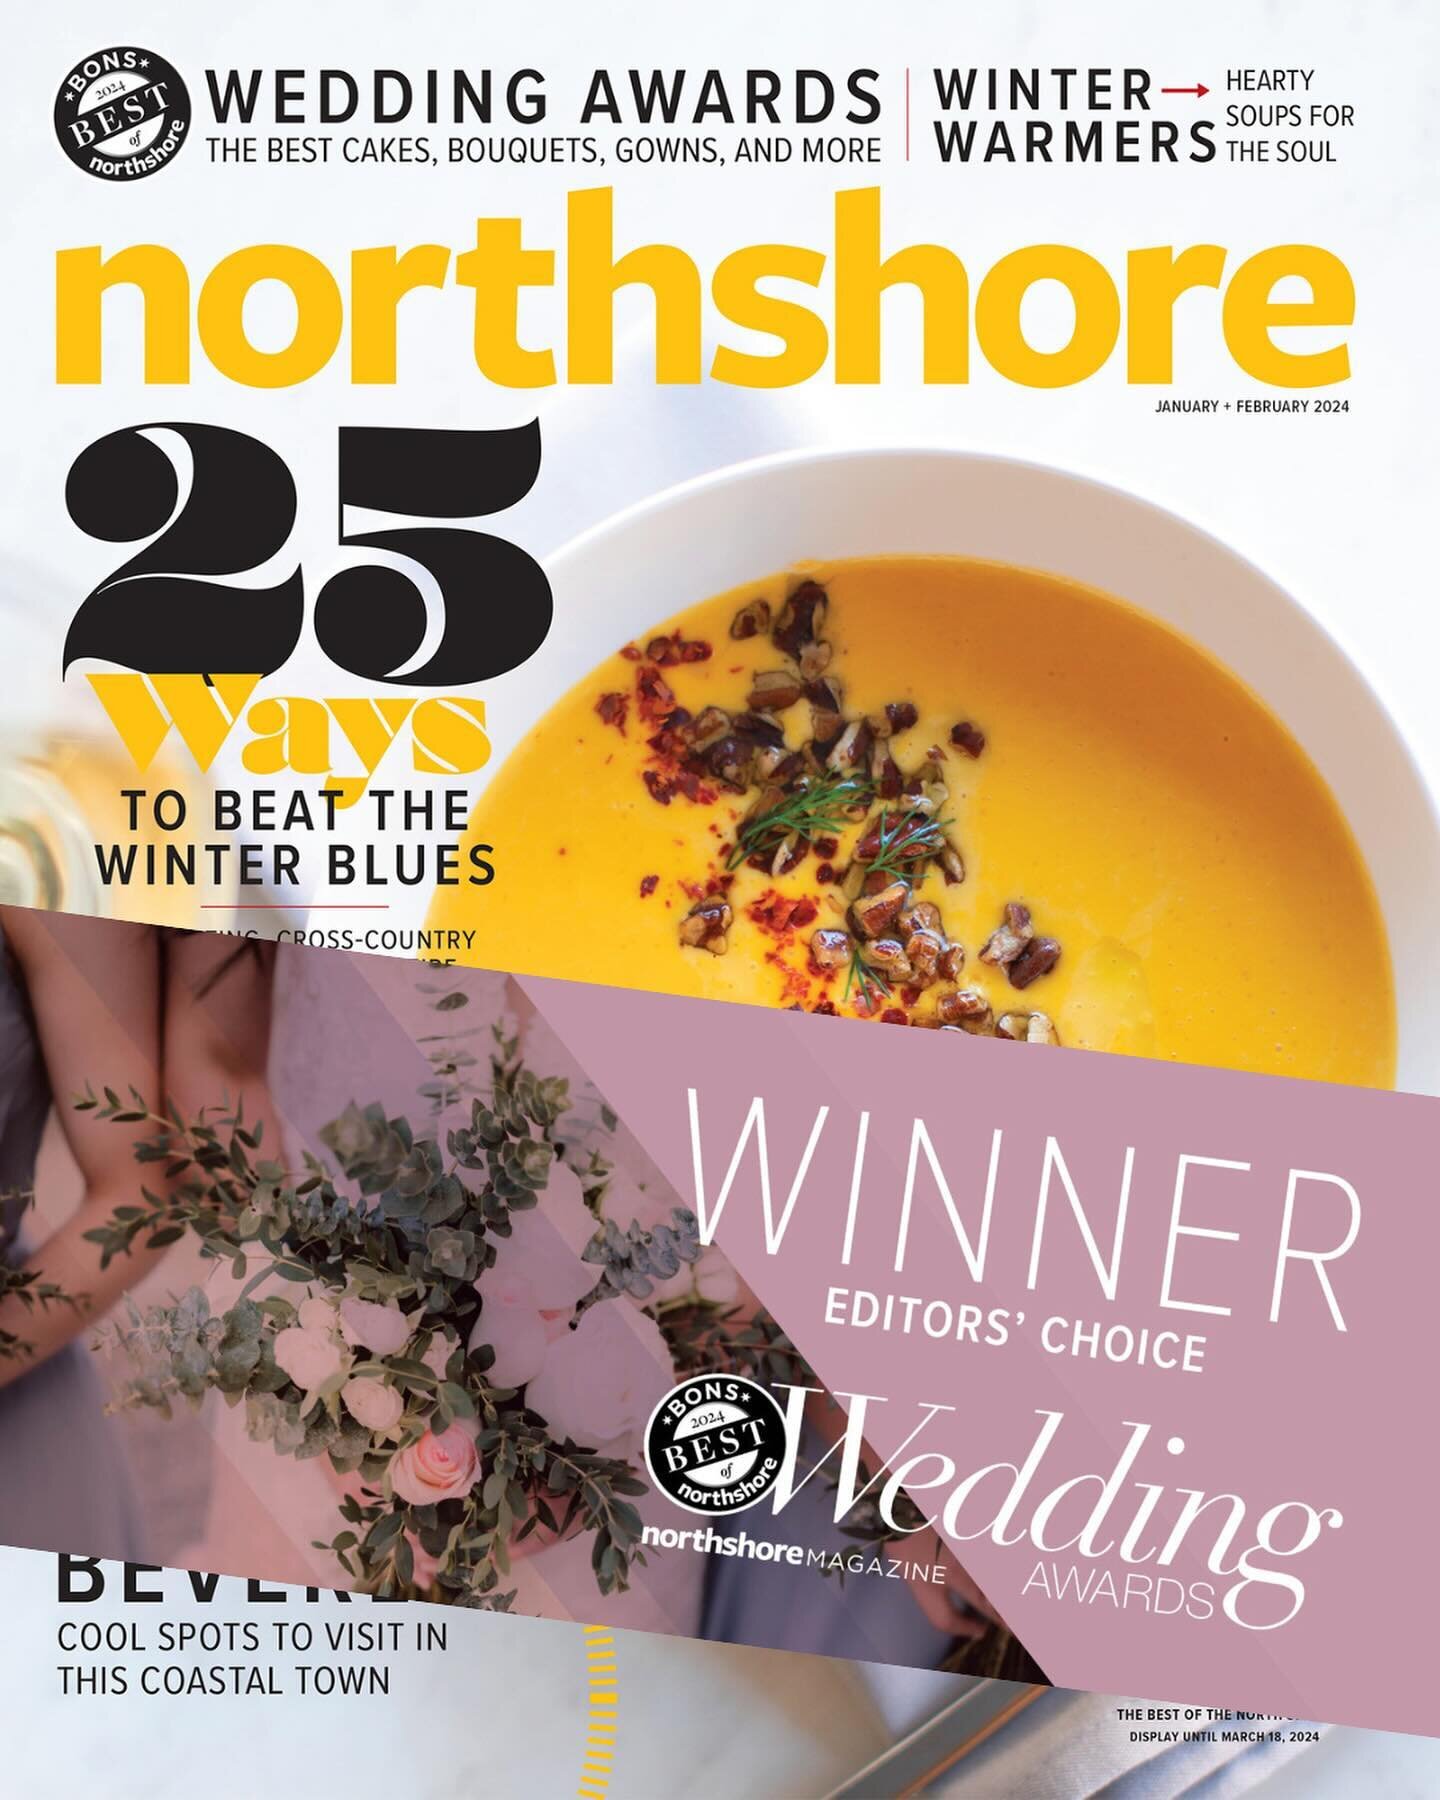 Thank you, Editor Nancy Berry and @northshoremag for this incredible honor. What a perfect way to kick off 2024. Your vote of confidence and ongoing support inspire us to raise the bar every year. Here&rsquo;s to a year ahead filled with good health,